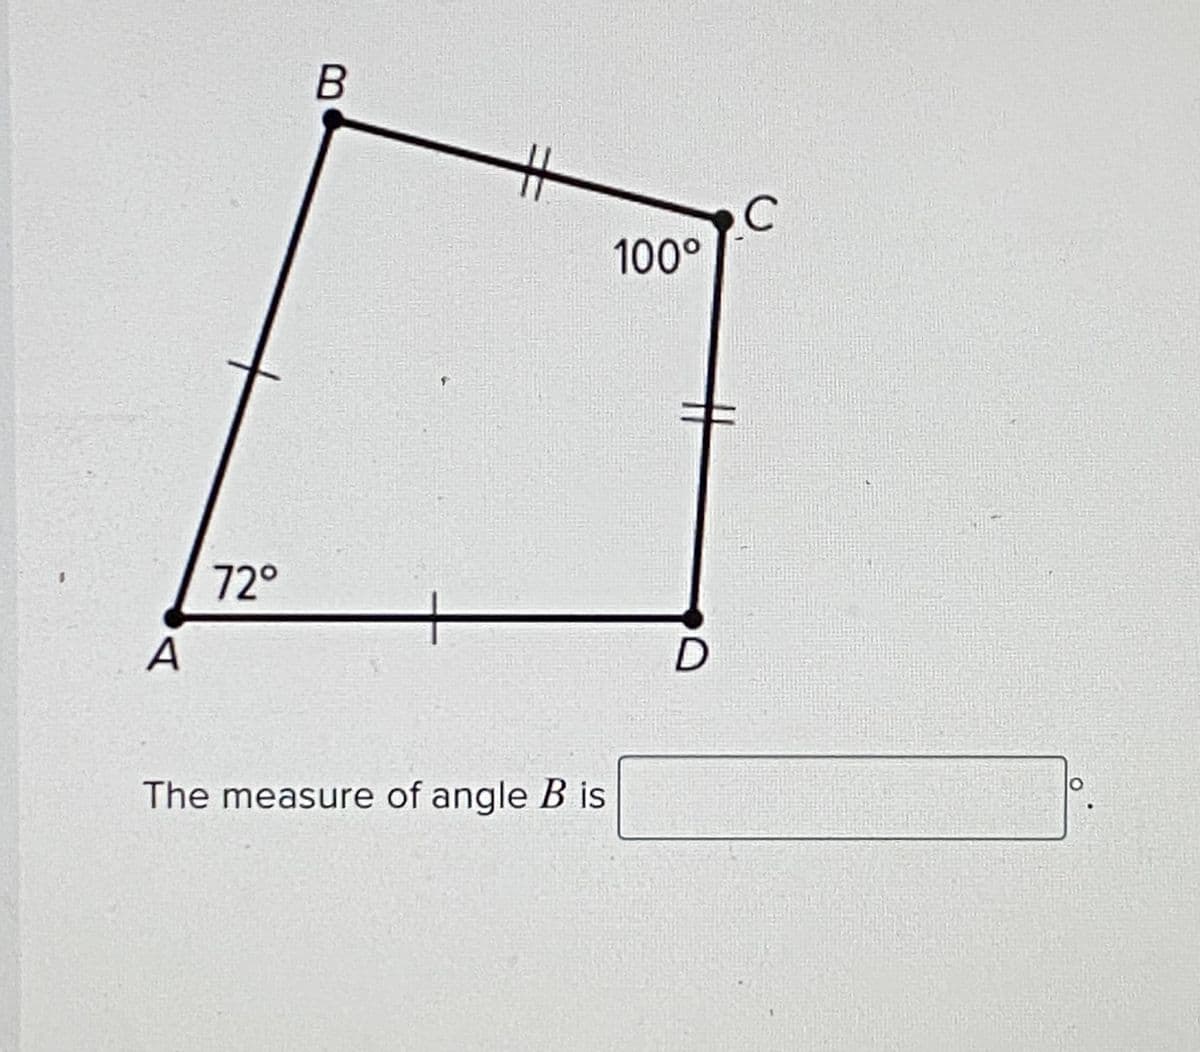 A
72°
B
The measure of angle B is
100°
D
C